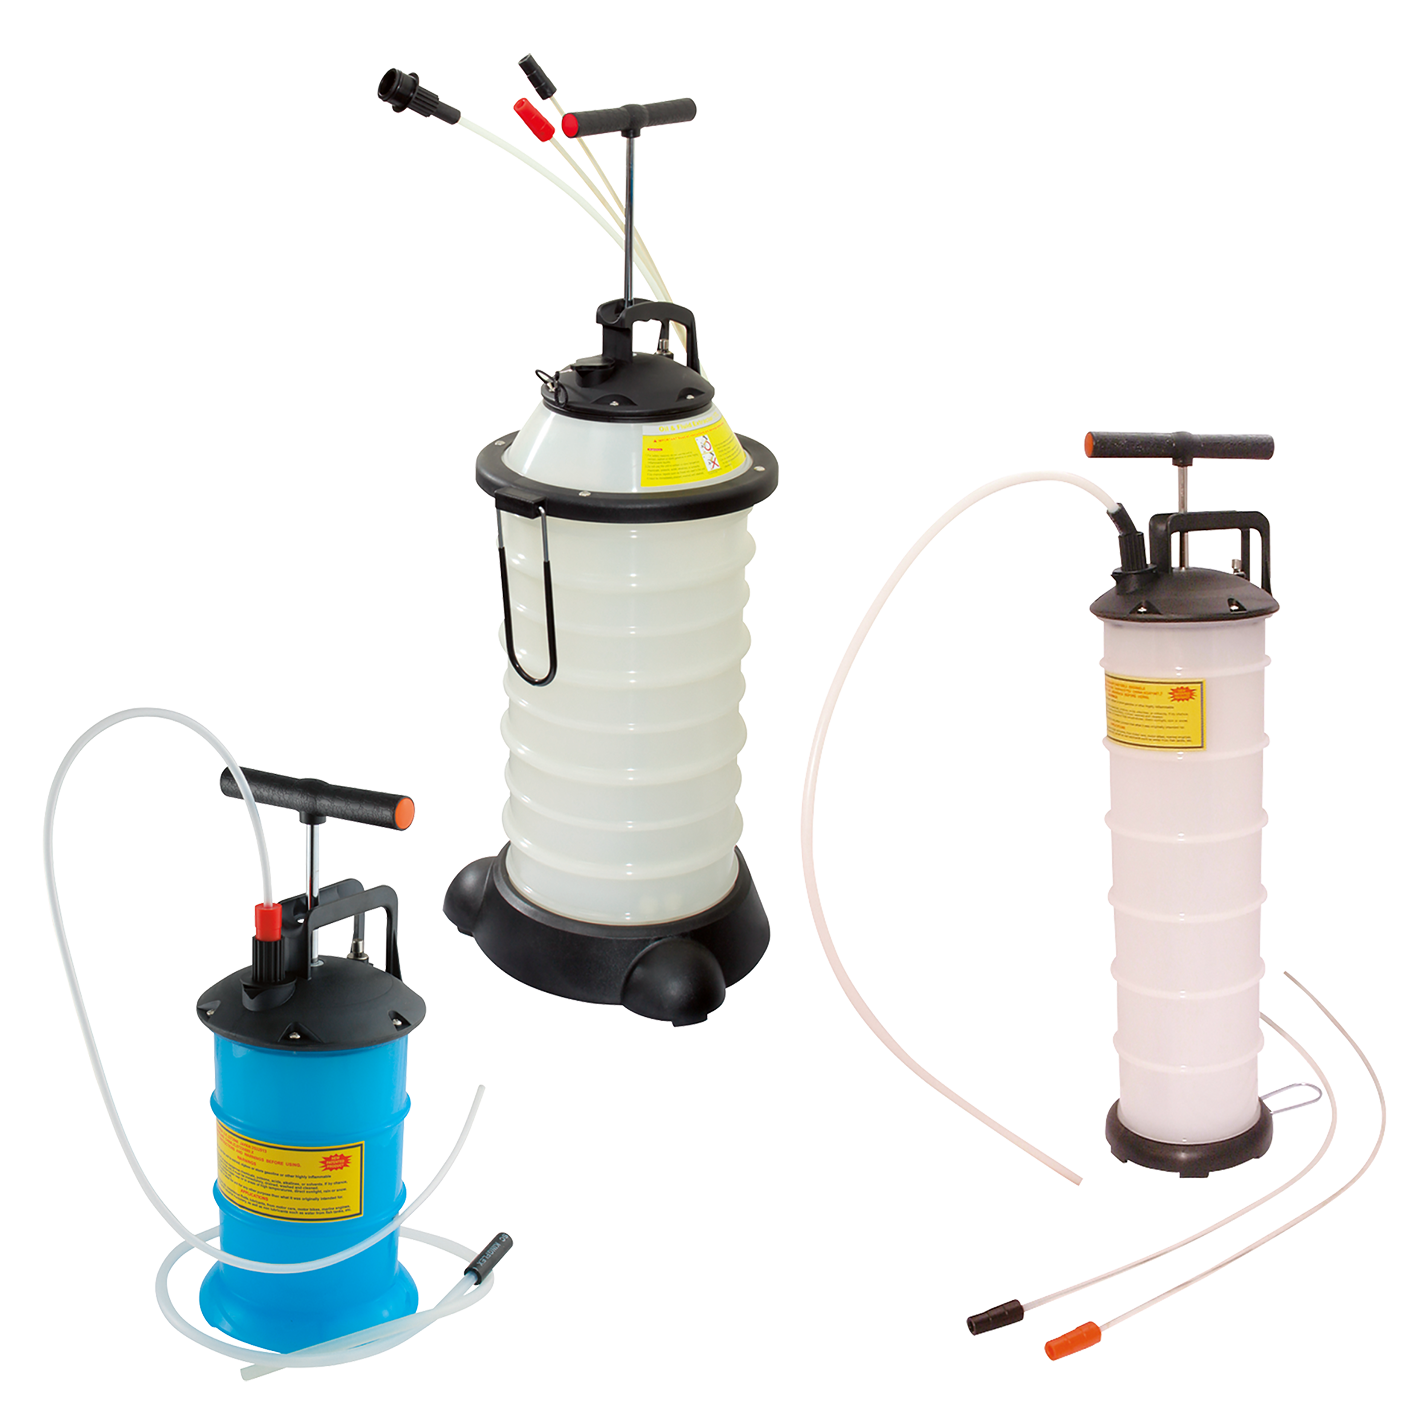 2.7 LTR SUCTION/EXTRACTION UNIT